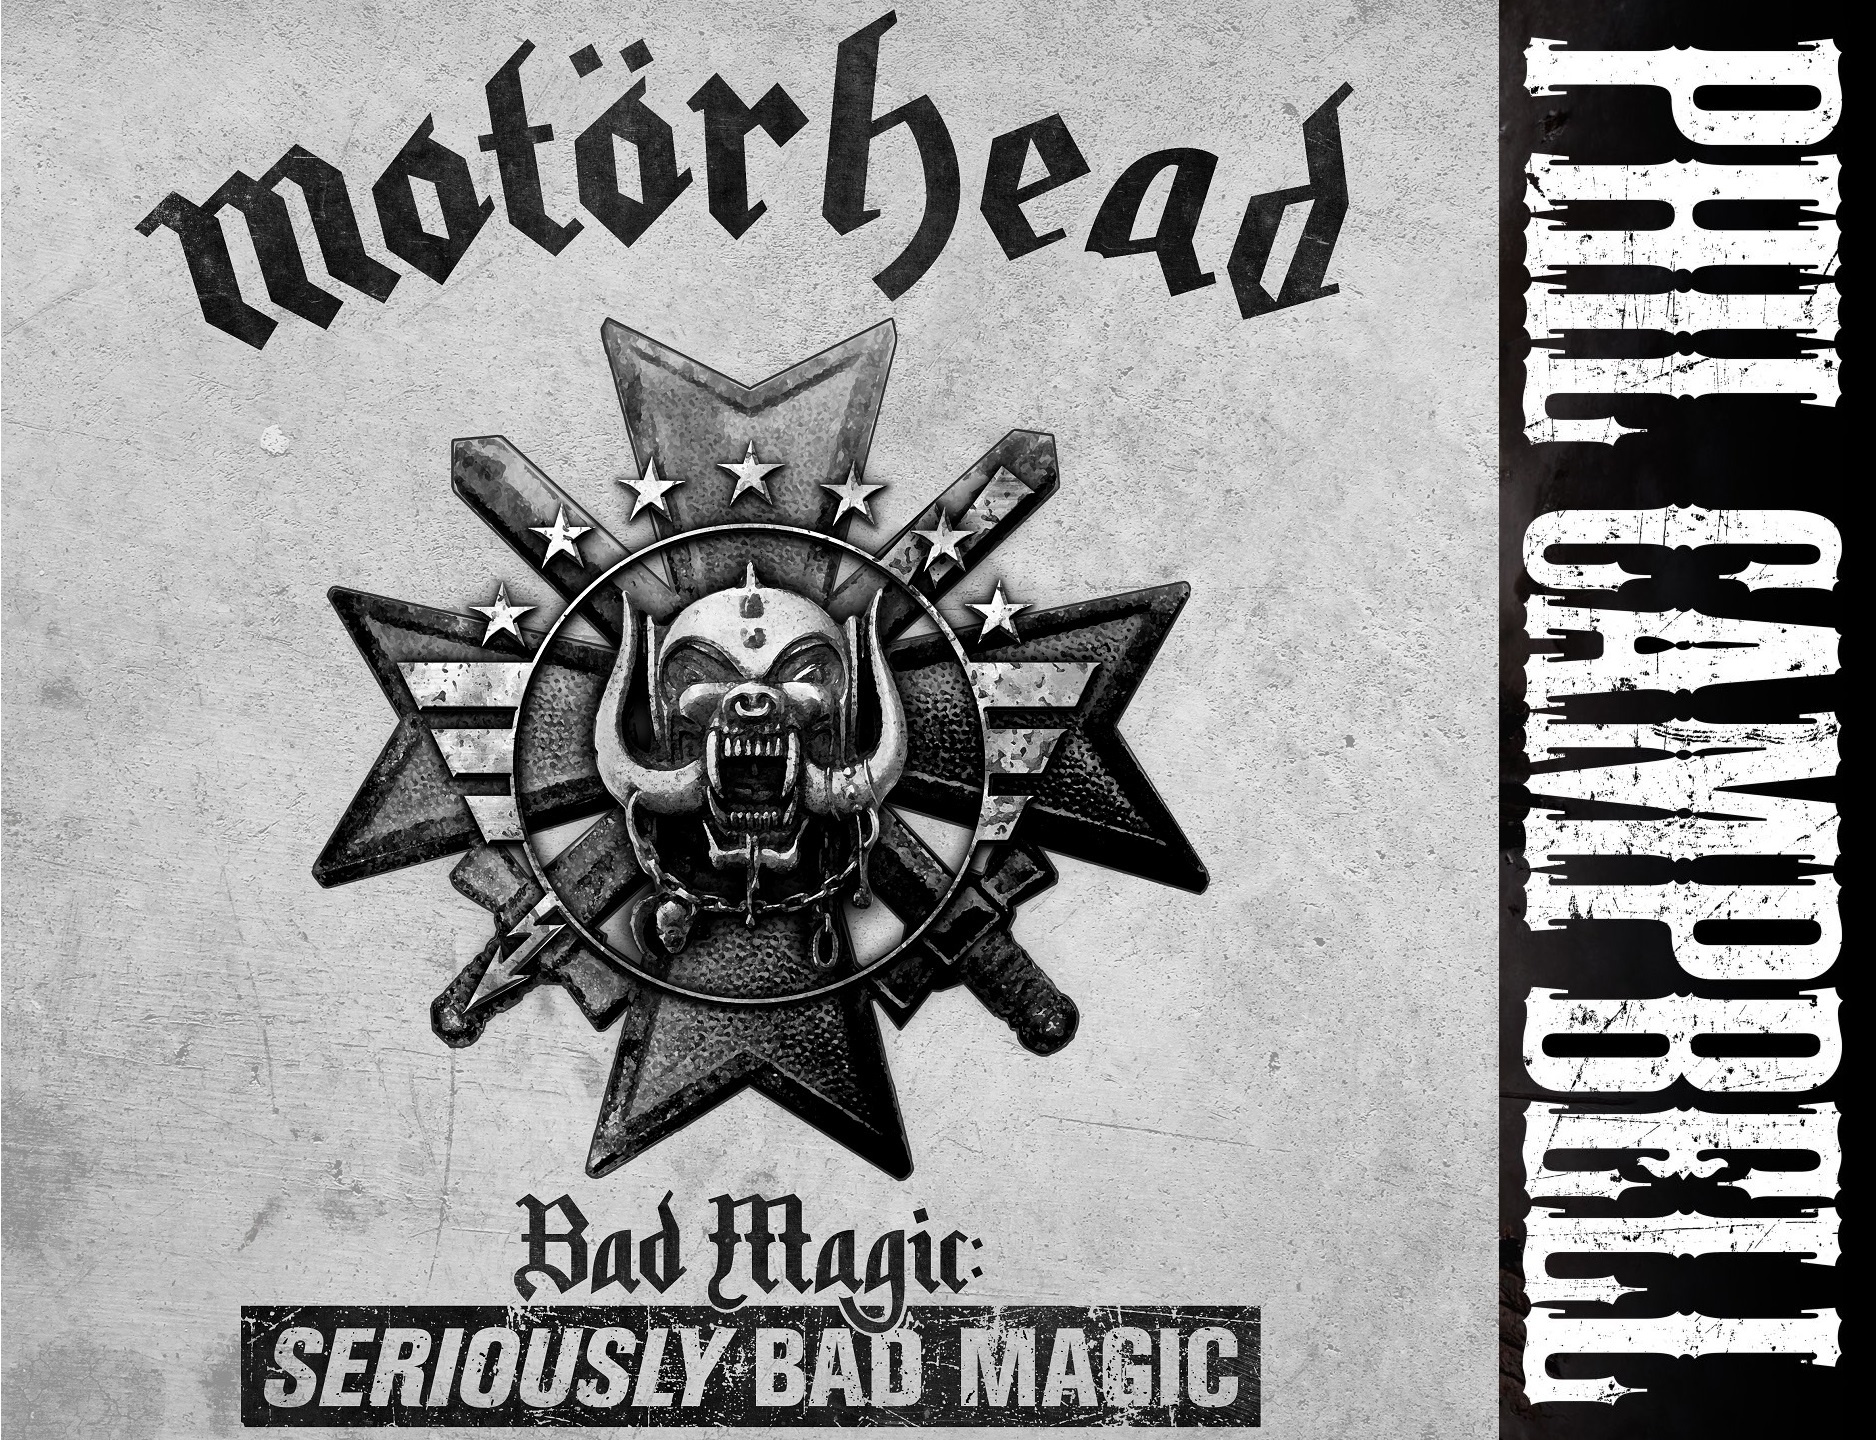 Motorhead’s Phil Campbell Talks Seriously Bad Magic In New Interview